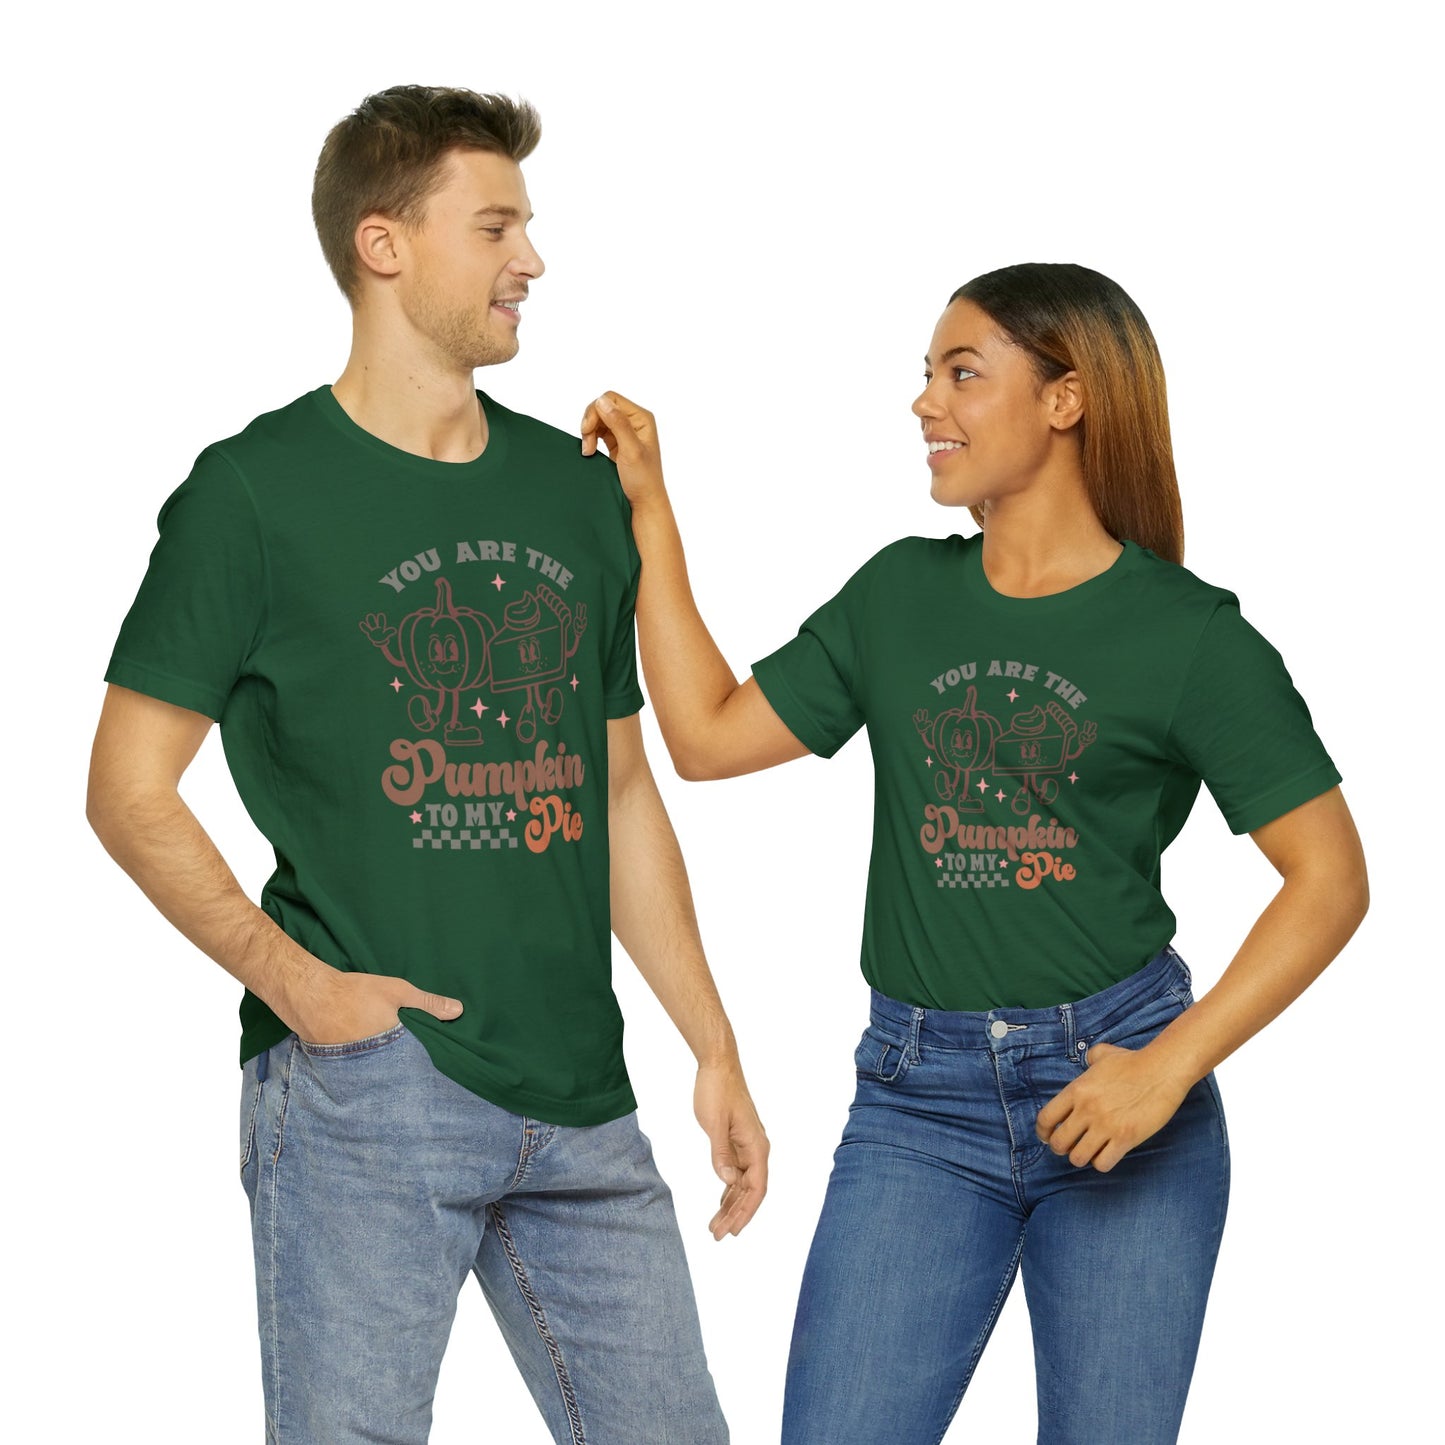 You Are The Pumpkin To My Pie | Unisex Jersey Short Sleeve Tee | Thanksgiving Funny Shirt